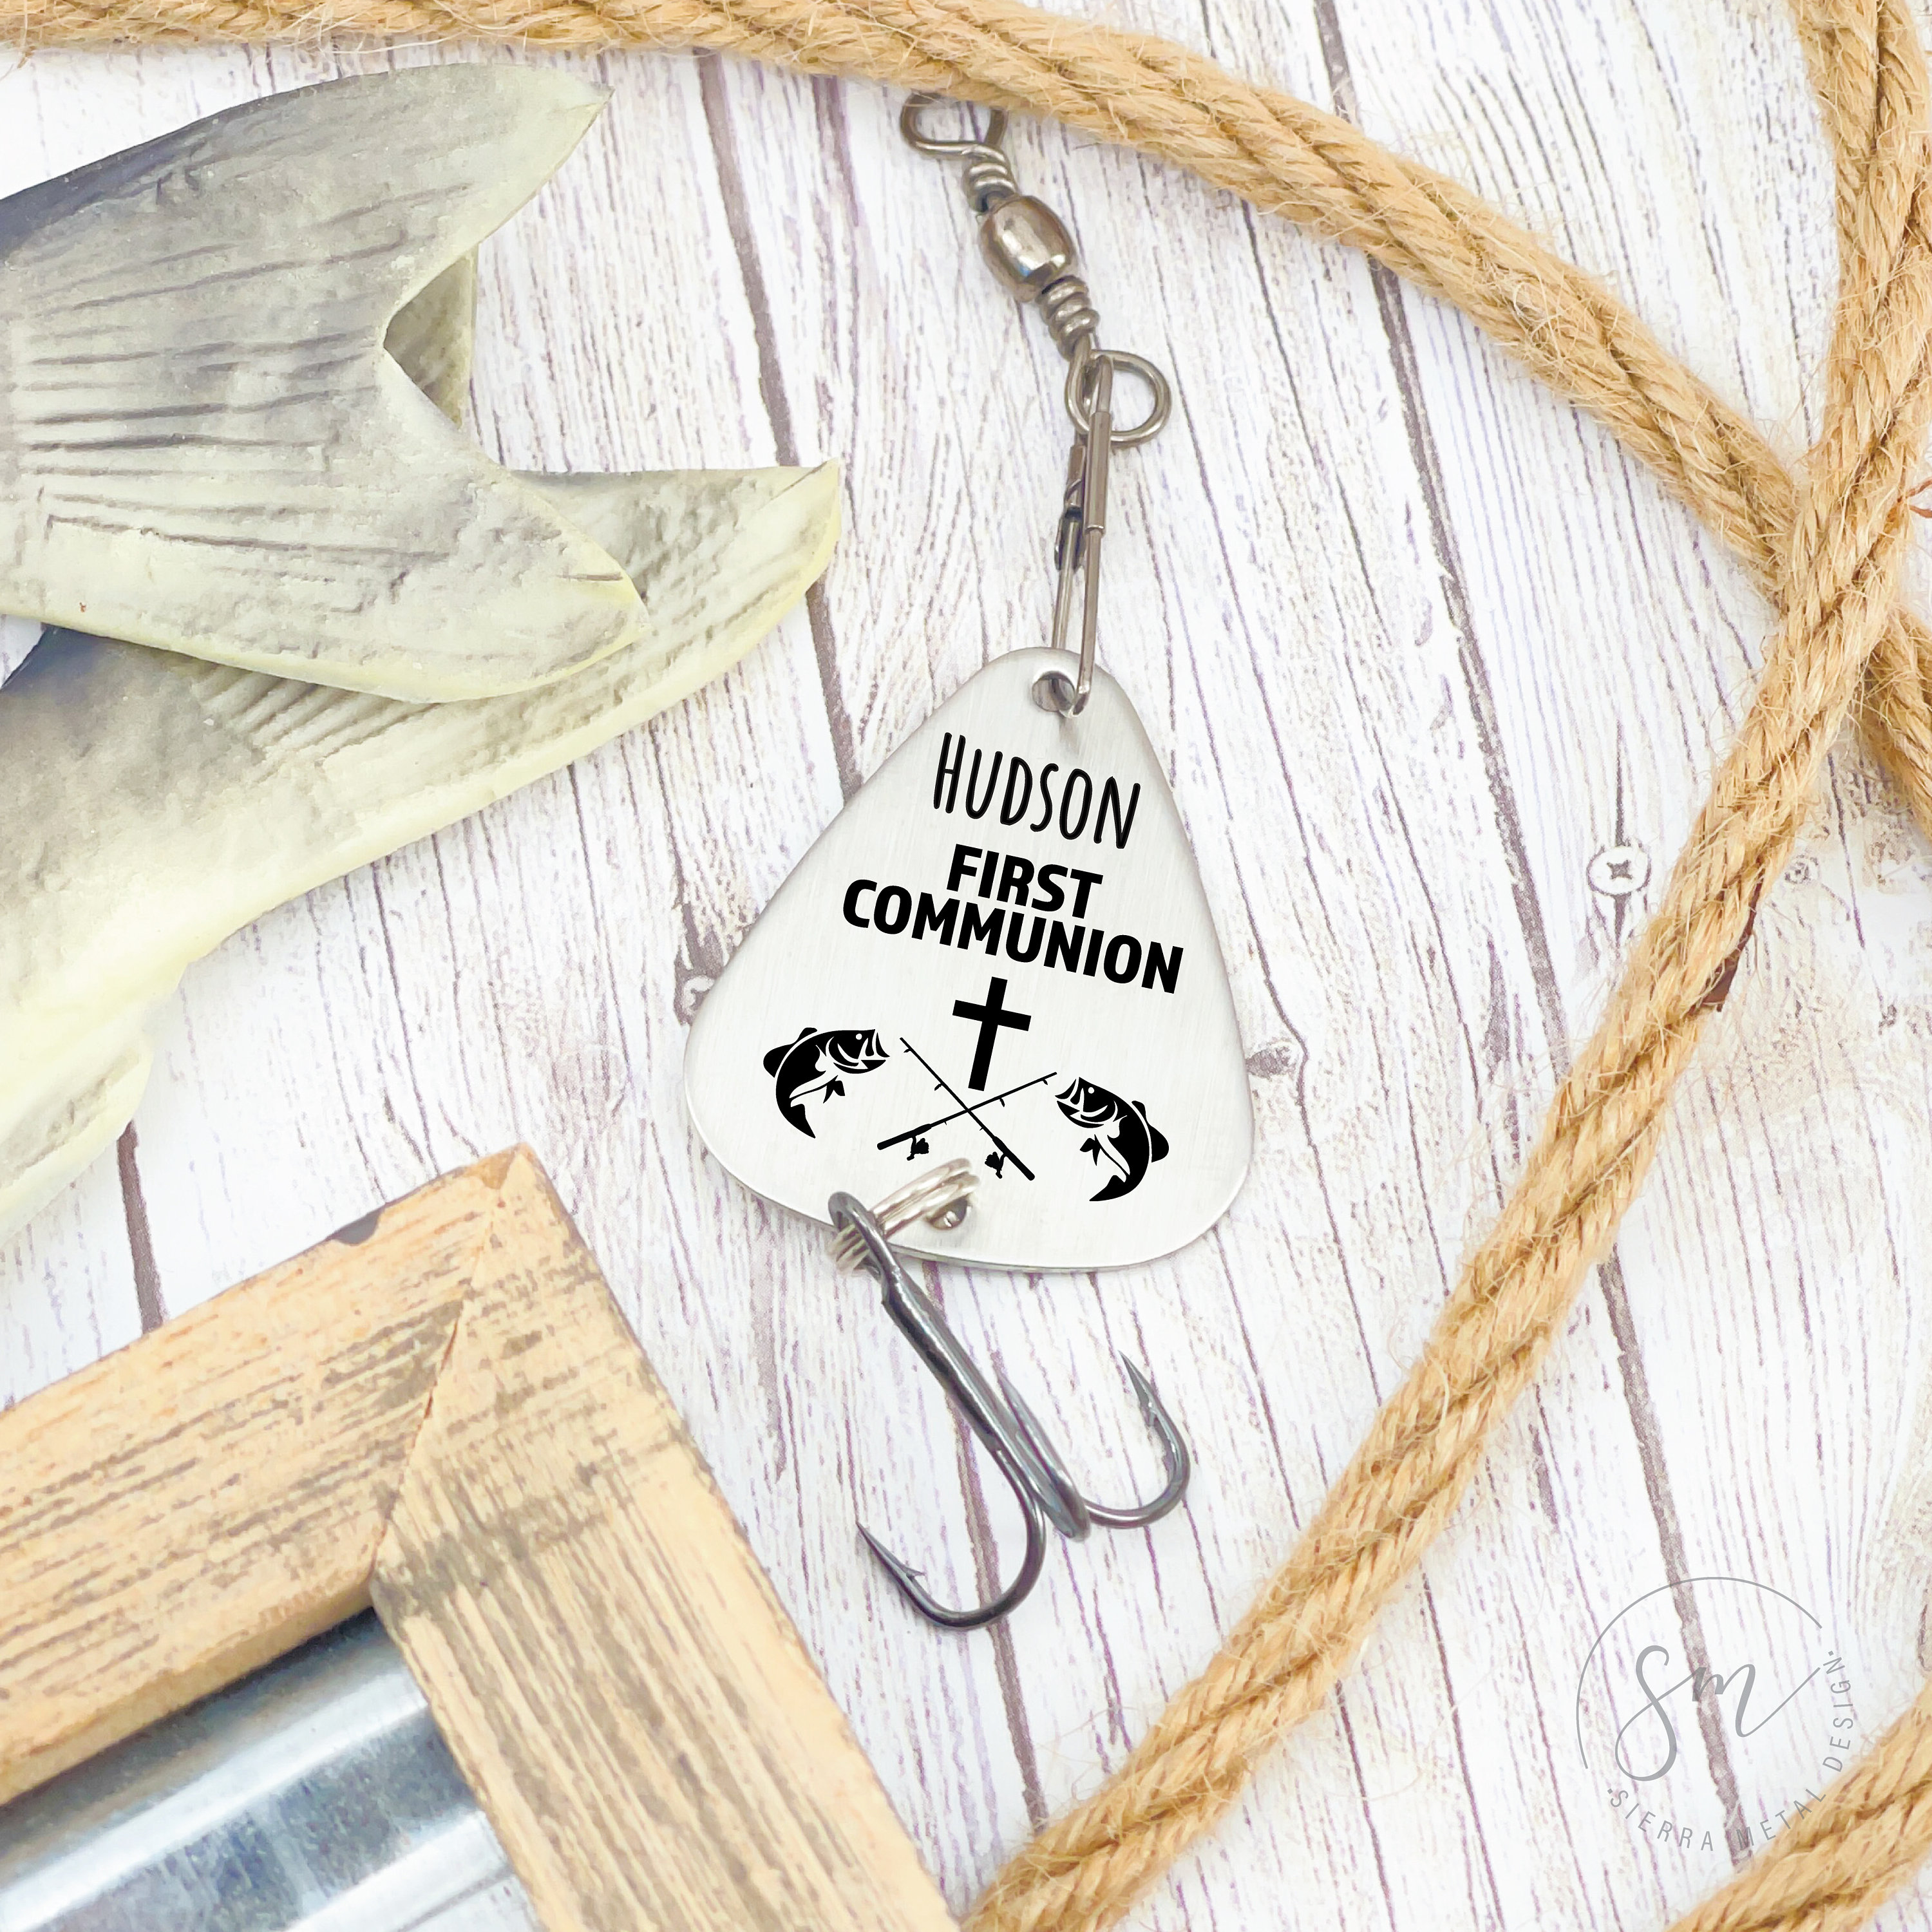 First Holy Communion Fishing Lure Fish Personalized Gift Communion Eucharist  Sacraments of Initiation Cross Christianity Religion 